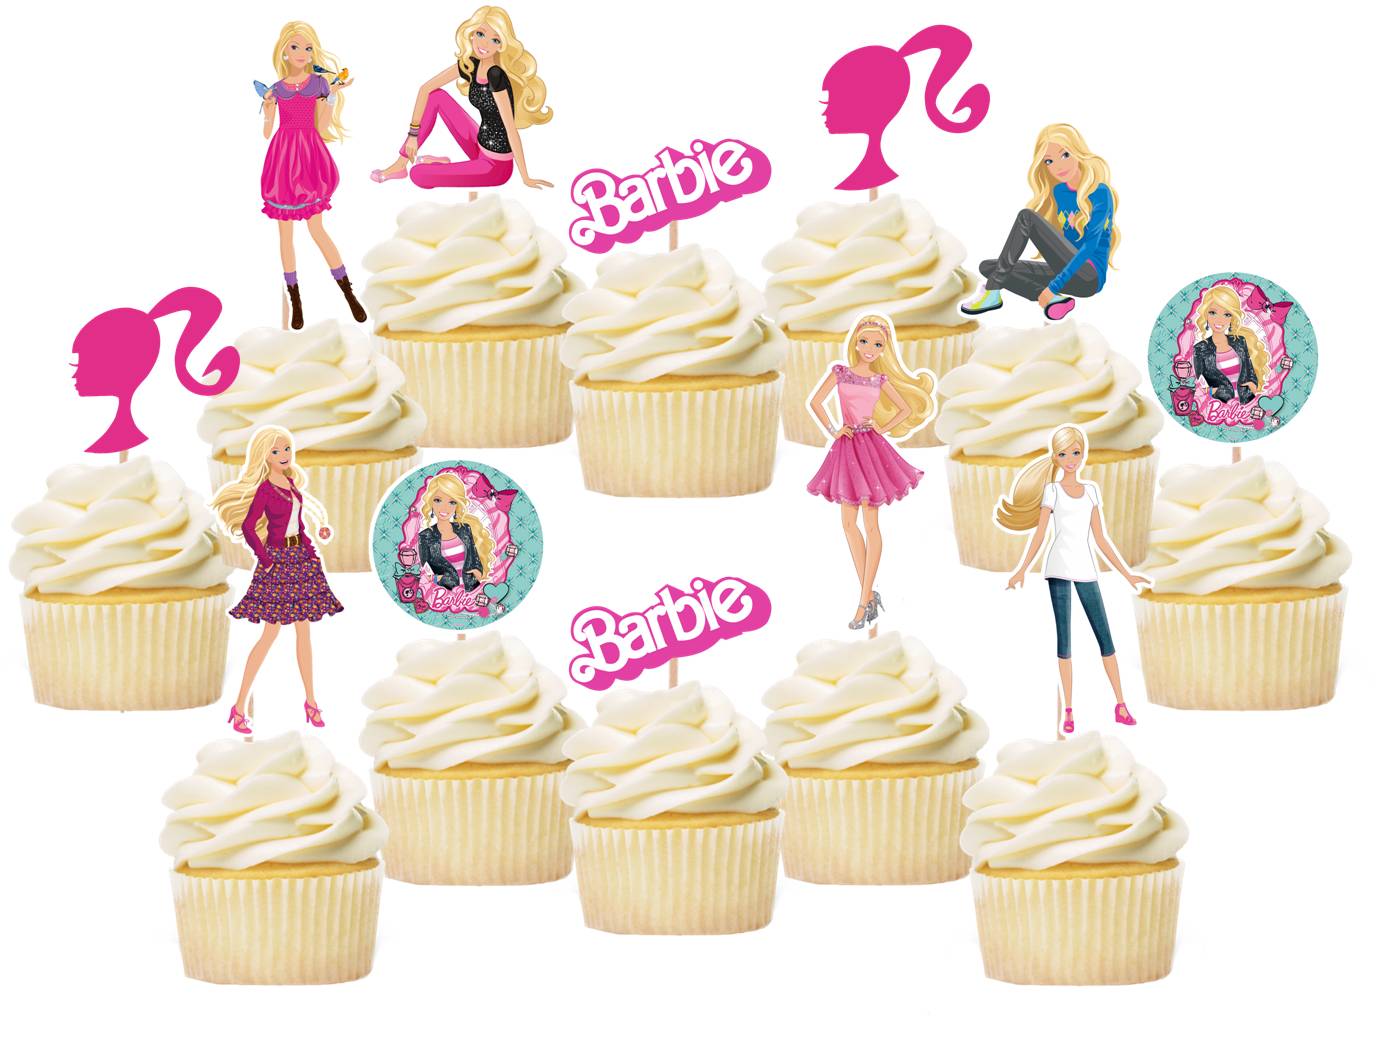 BARBIE UNICORN HORSE REAL EDIBLE ICING CAKE TOPPER PARTY IMAGE FROSTING  SHEET | eBay